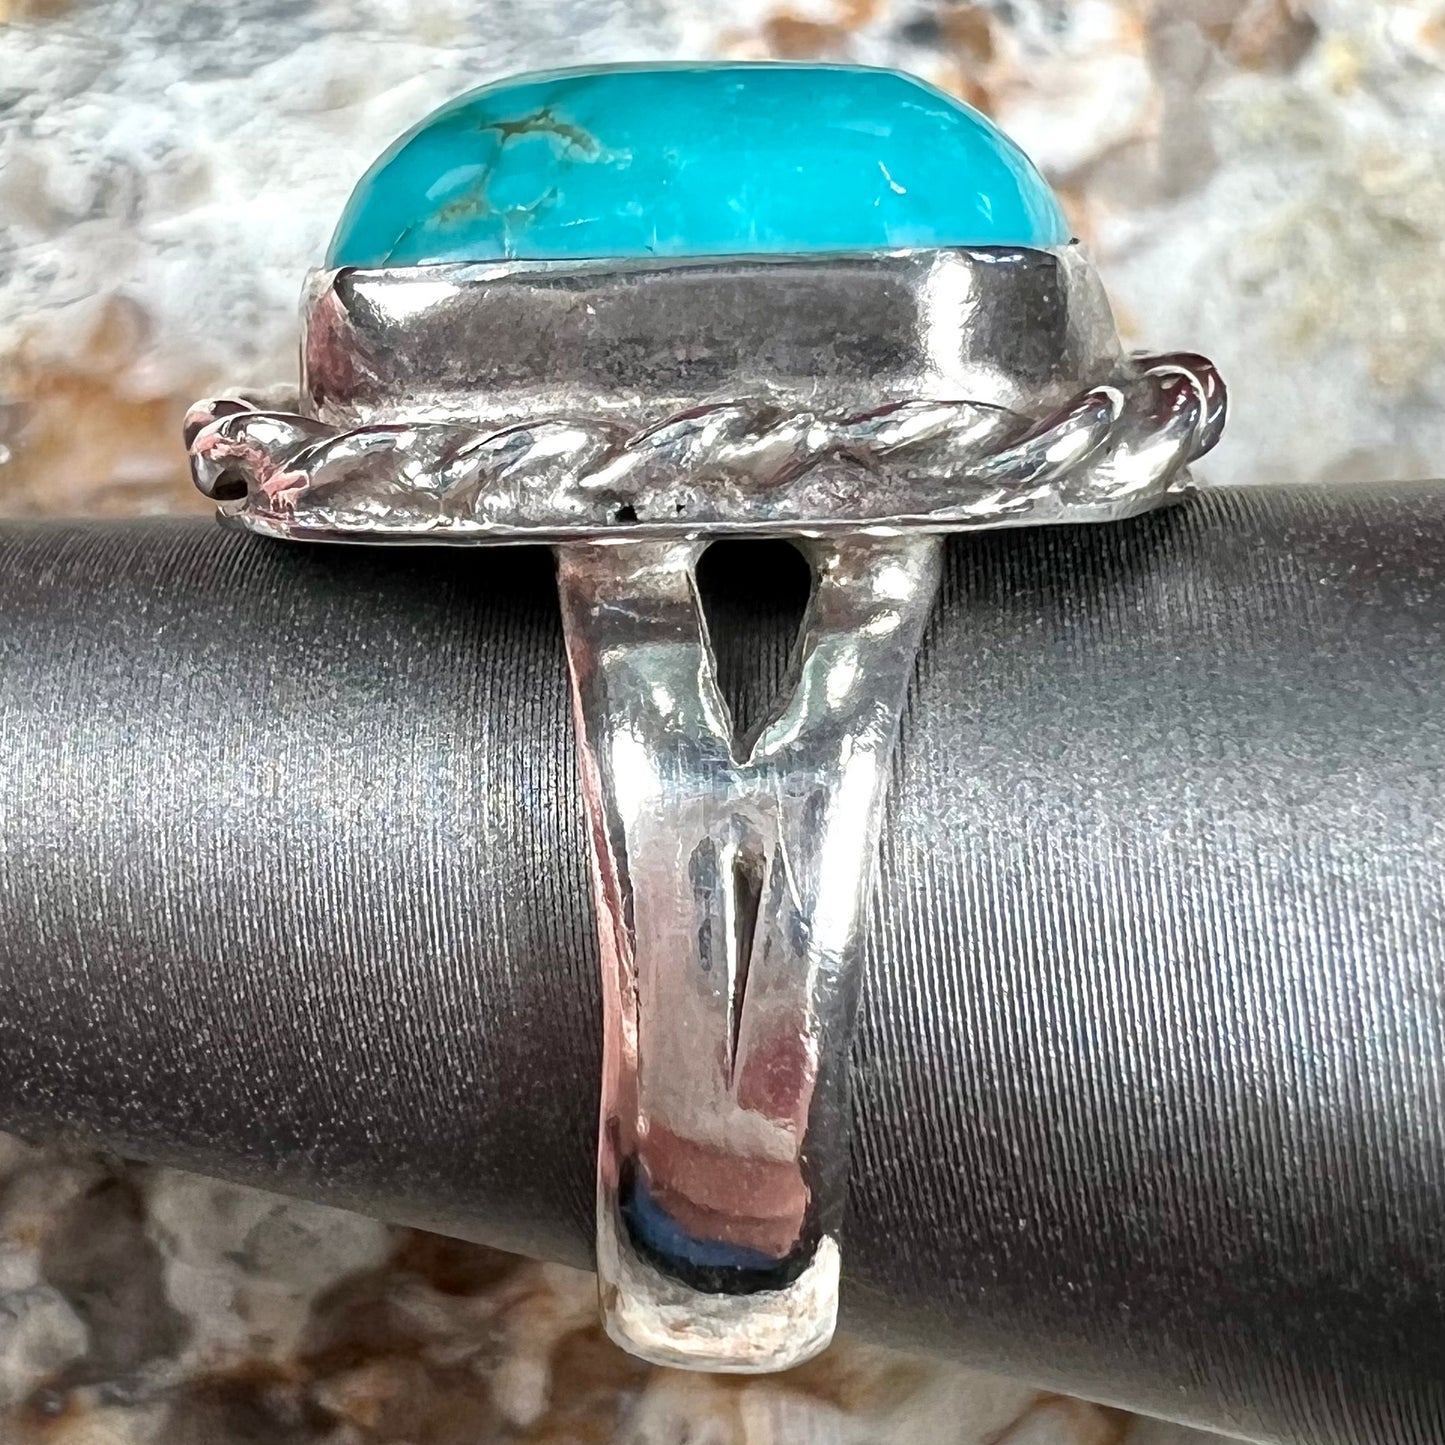 A sterling silver turquoise split shank ring.  There is a handmade silver rope around the turquoise.